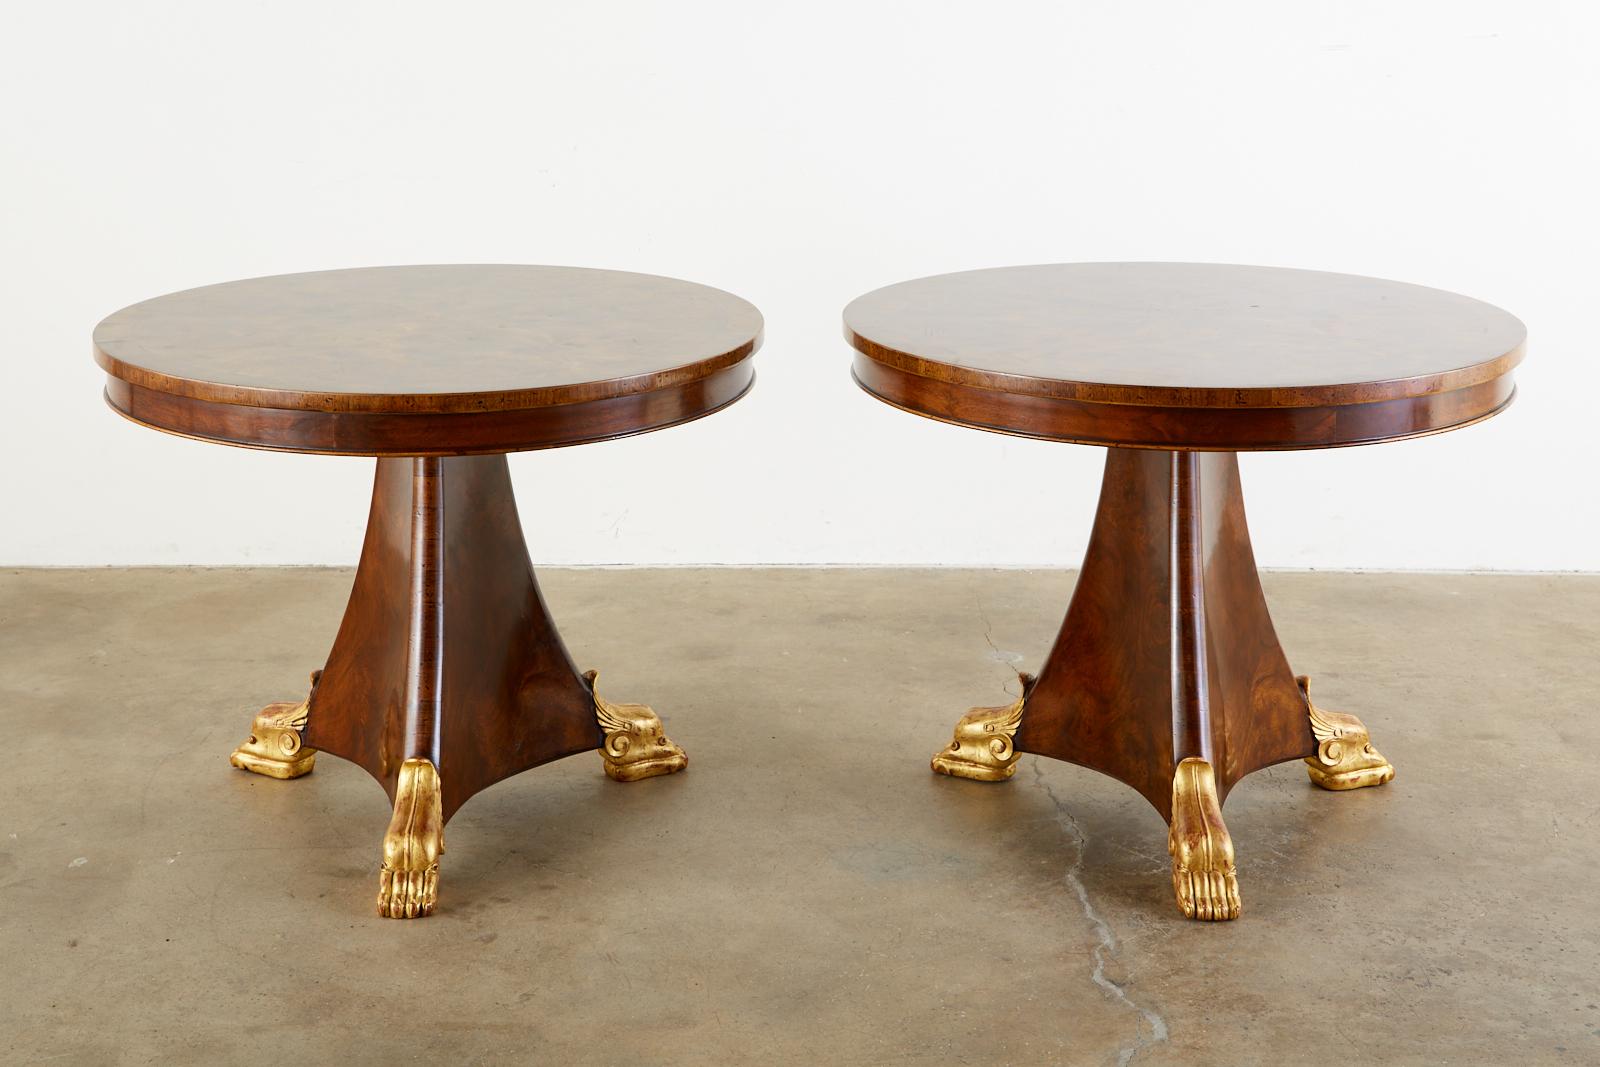 Fine matched pair of English Regency style pedestal tables. Featuring a dramatic burl veneer top. The round tables could serve as center tables, dining tables, or library tables with a 28 inch height. The triangular pedestal flares out on the end